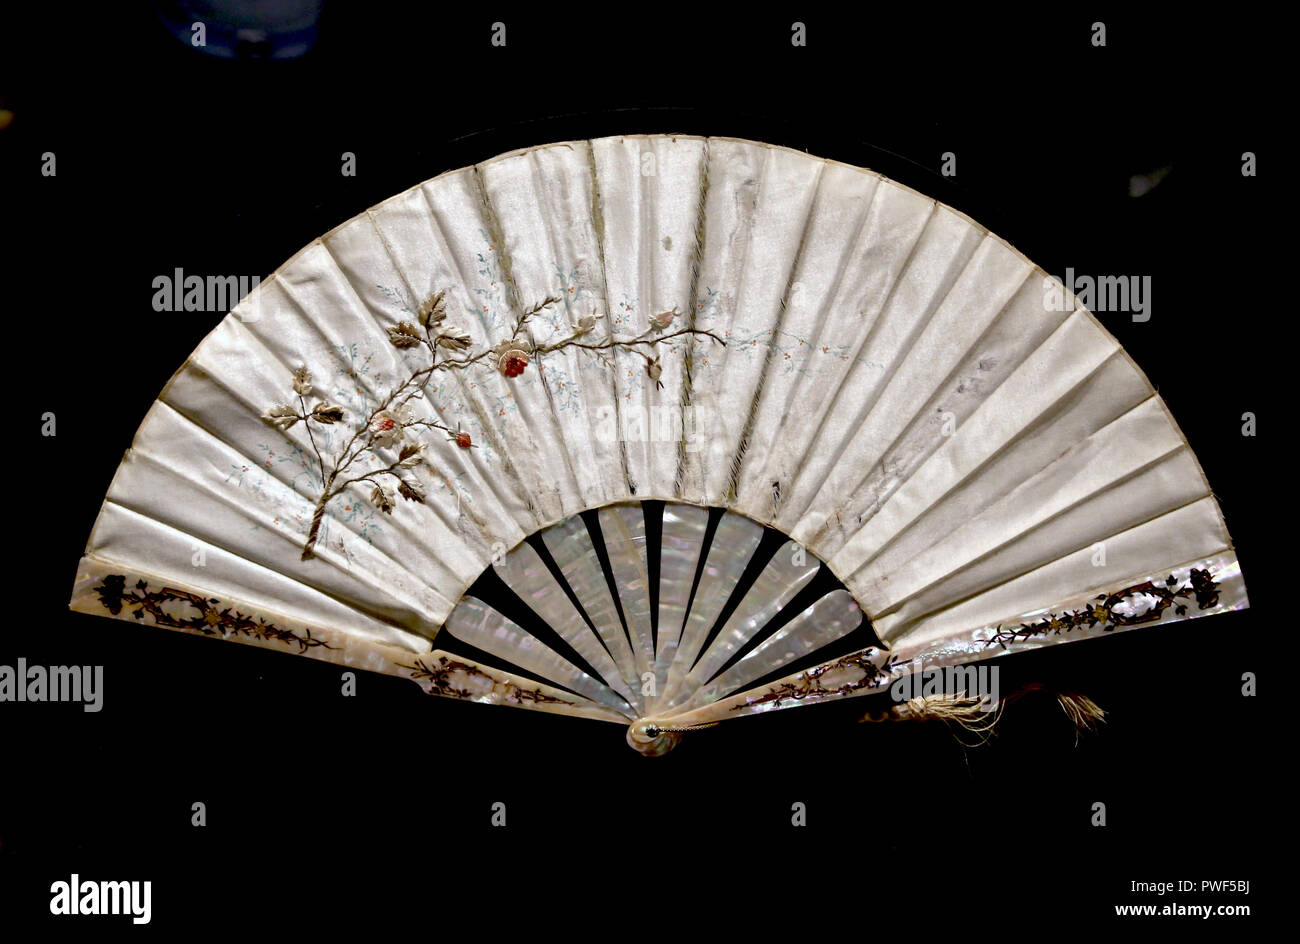 Decorated folding fan. China, about 1900. Mother of pearl and satin silk. 8 stretchers. Museu do Oriente, Lisbon. Stock Photo